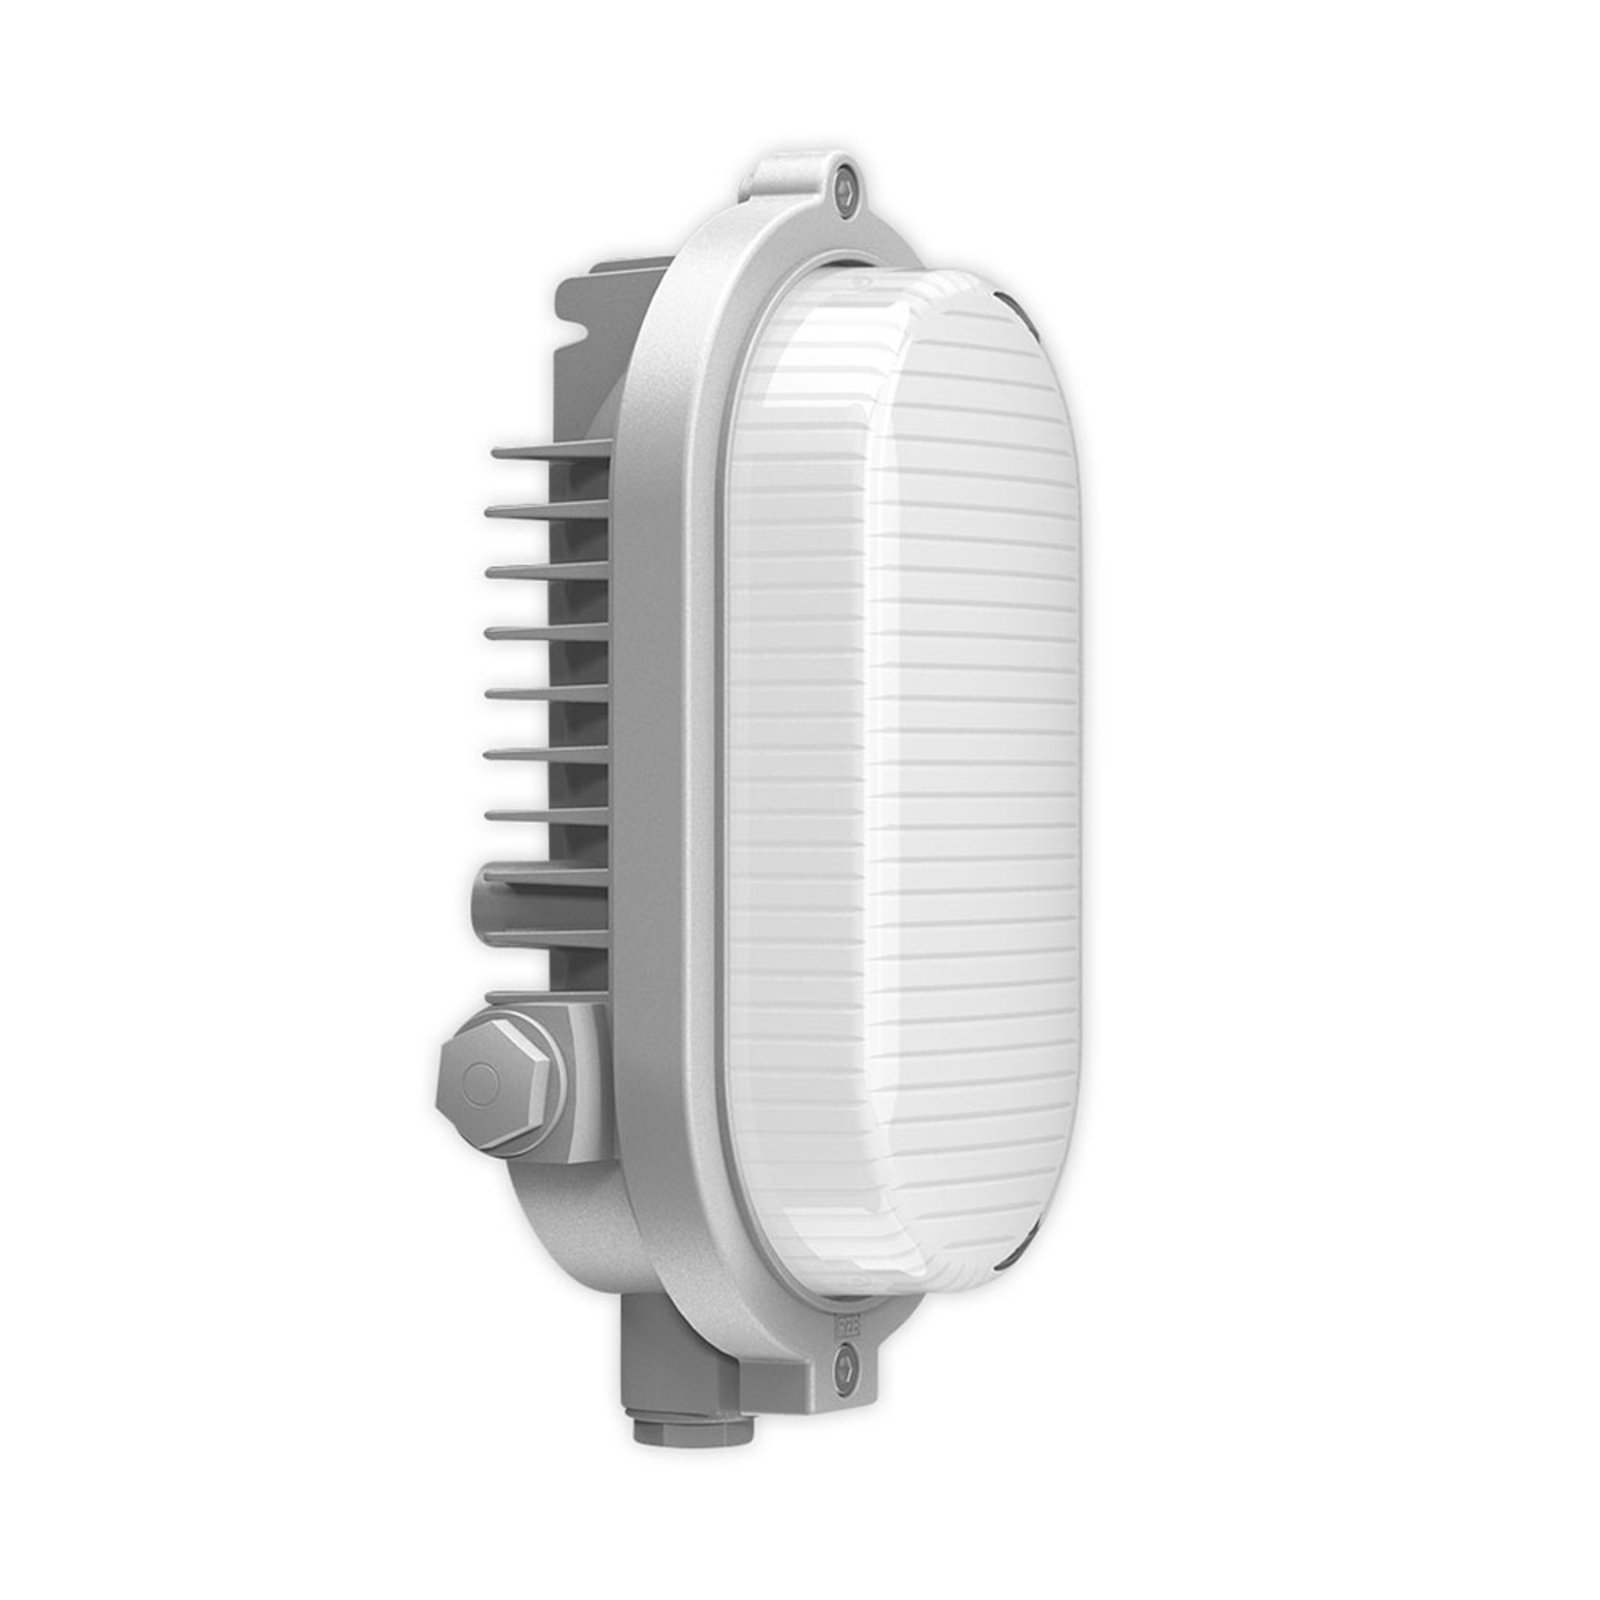 RZB Areno outdoor wall lamp IP66 silver/white 840